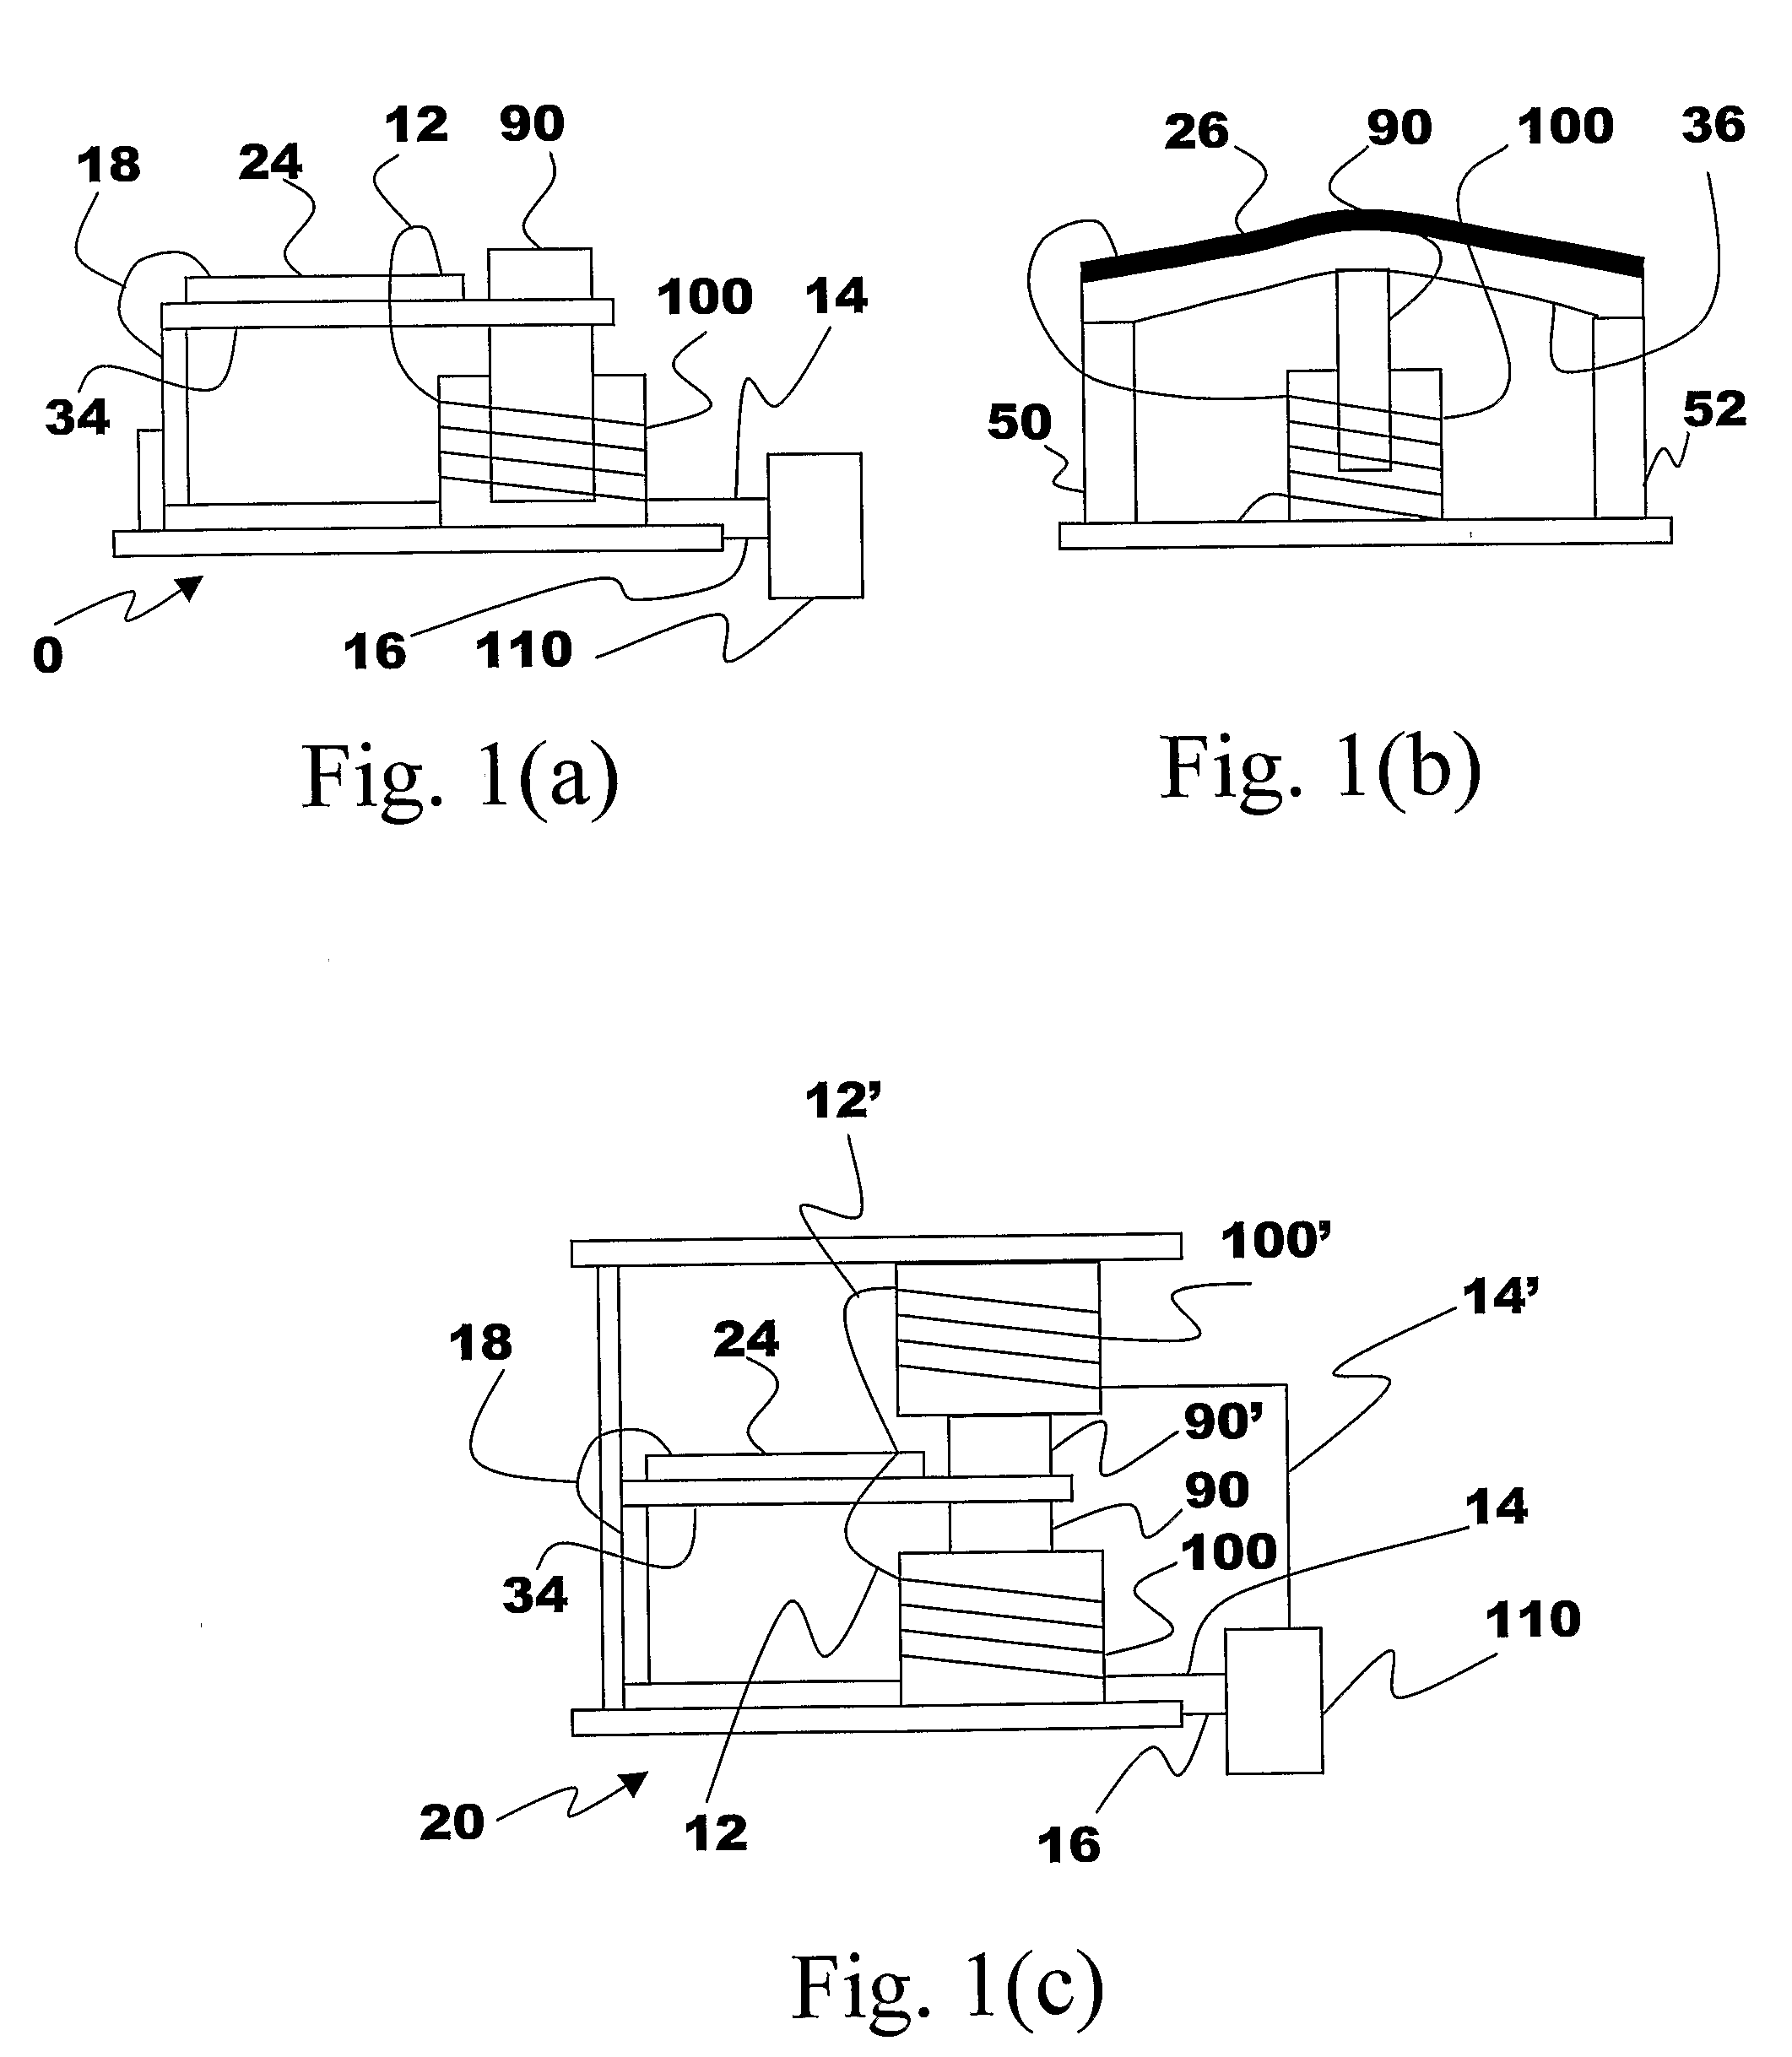 Energy Harvester with Adjustable Resonant Frequency